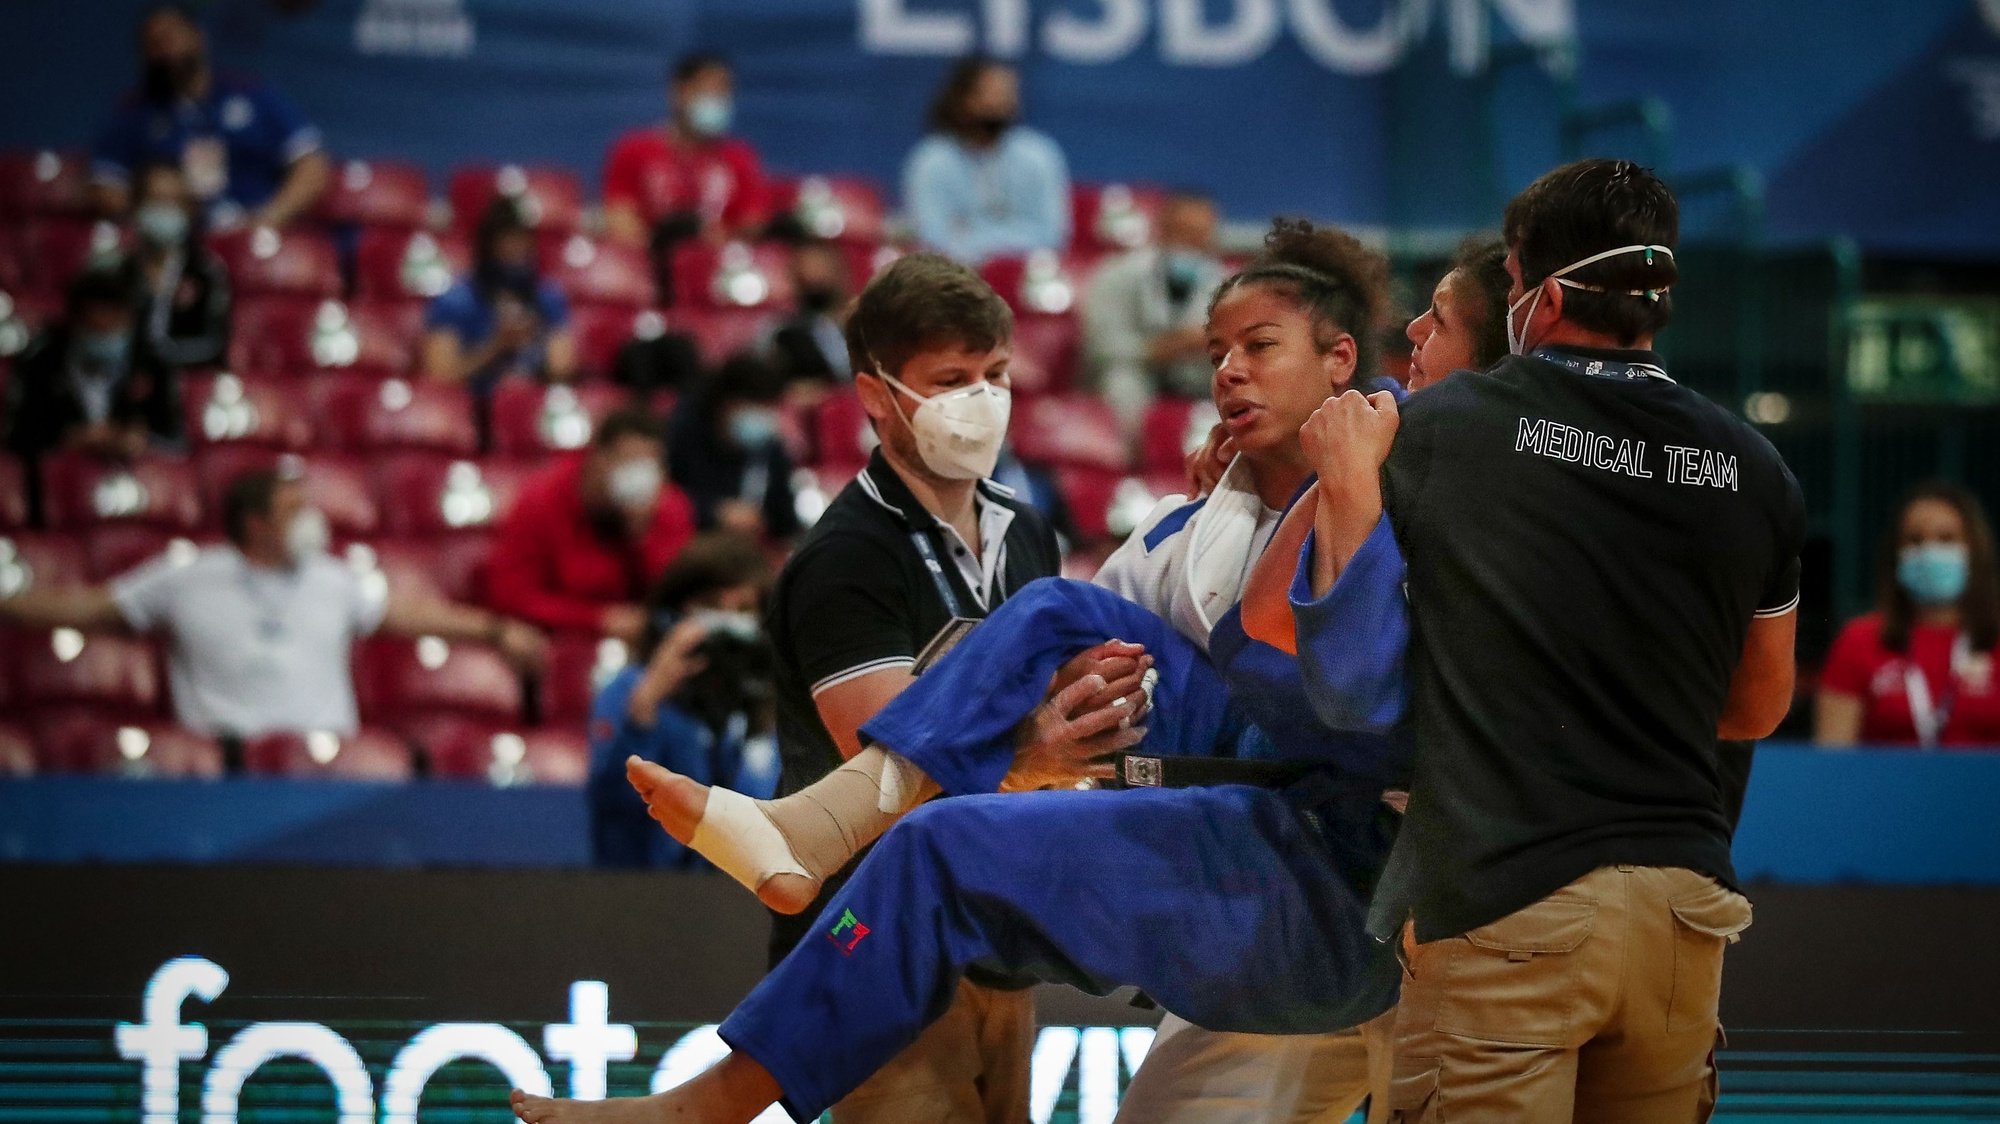 Patrícia Sampaio of Portugal (blue) is taken from tatami by Audrey Tcheumeo of France (white) and medical team after a injury during the repechage round in the women&#039;s -78kg category at the European Judo Championships in Lisbon, Portugal, 18 April 2021. NUNO VEIGA/LUSA